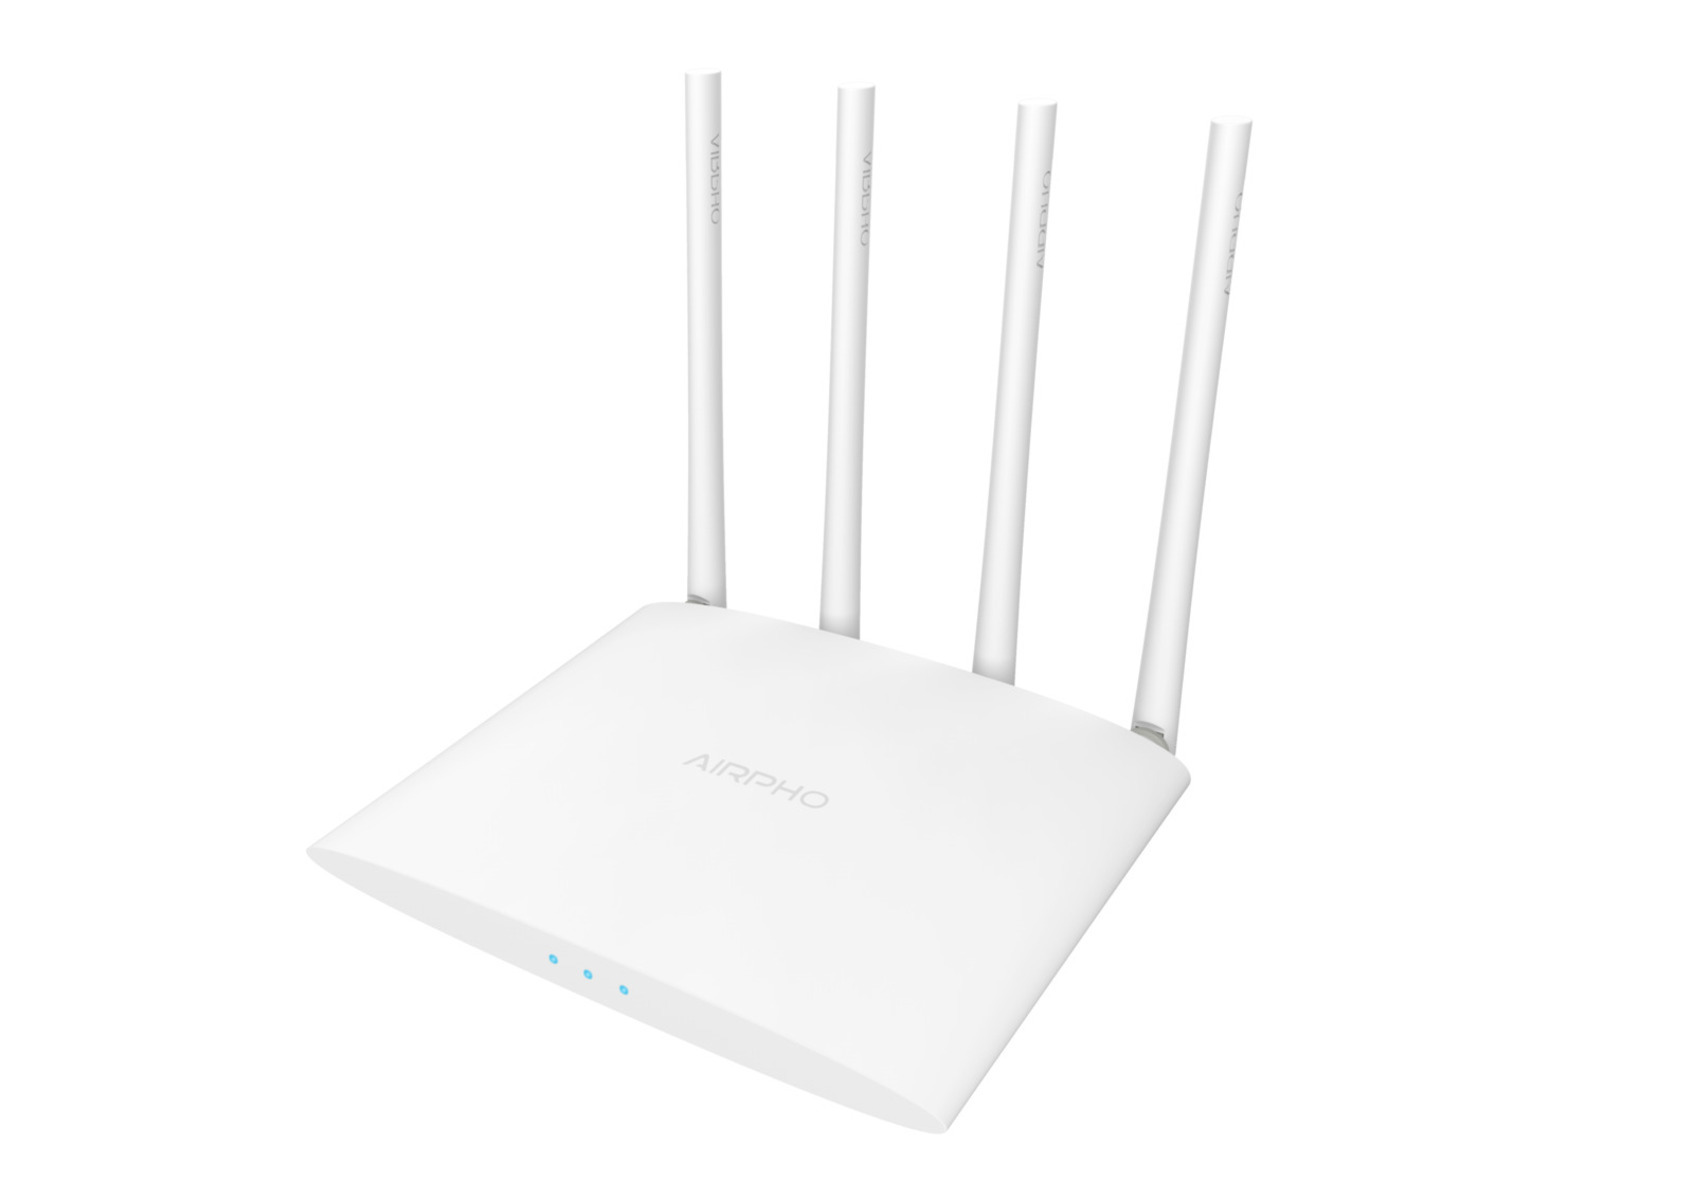 AIRPHO AR-W400 WLAN Router 1200 Mbit/s